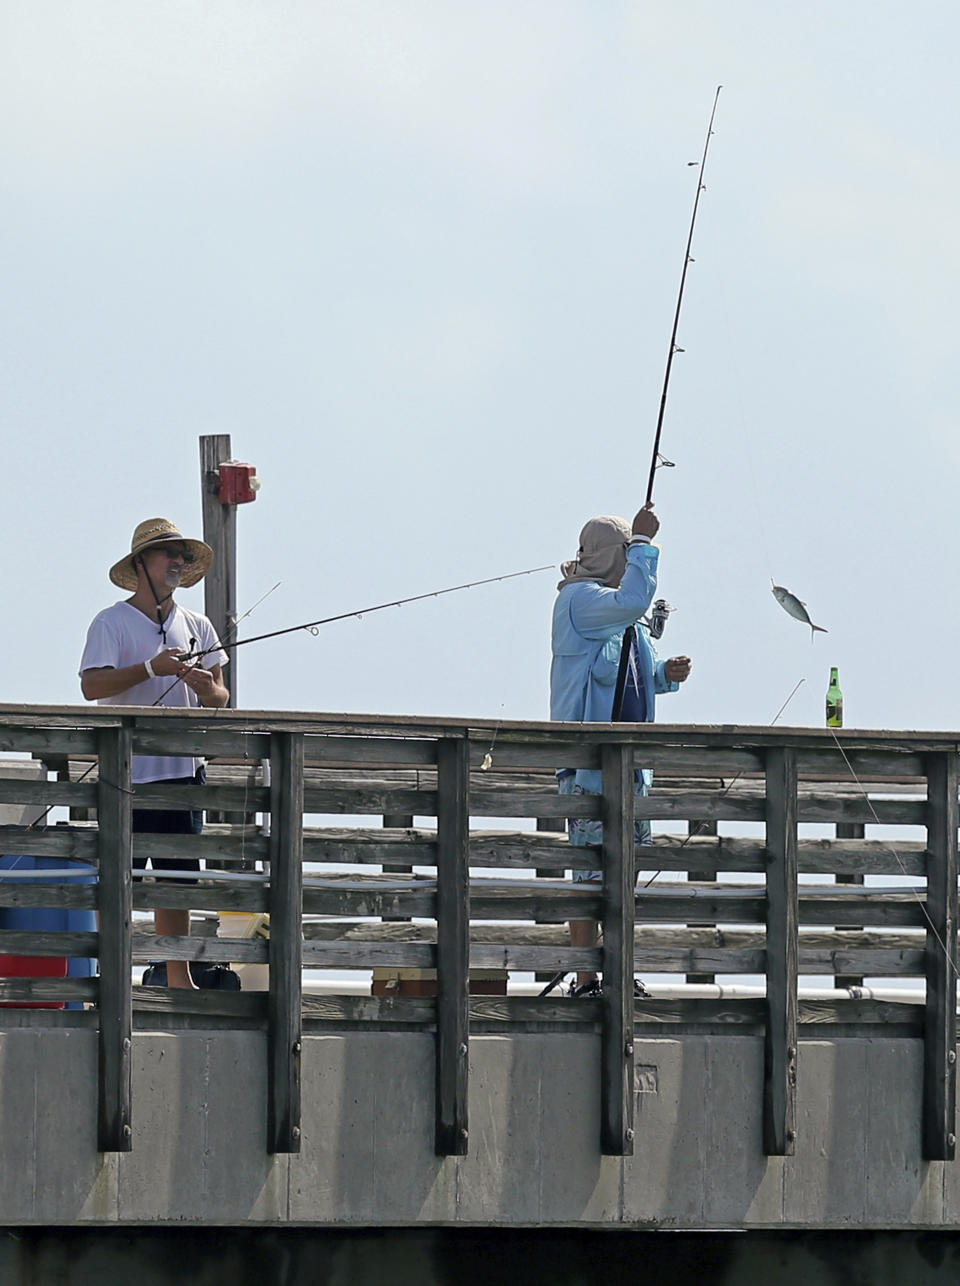 People fishing at Dania Beach Pier on Saturday, August 31, 2019 at Dania Beach in Florida. As of the 11 a.m. advisory, Hurricane Dorian is a category 4 storm. (David Santiago/Miami Herald via AP)